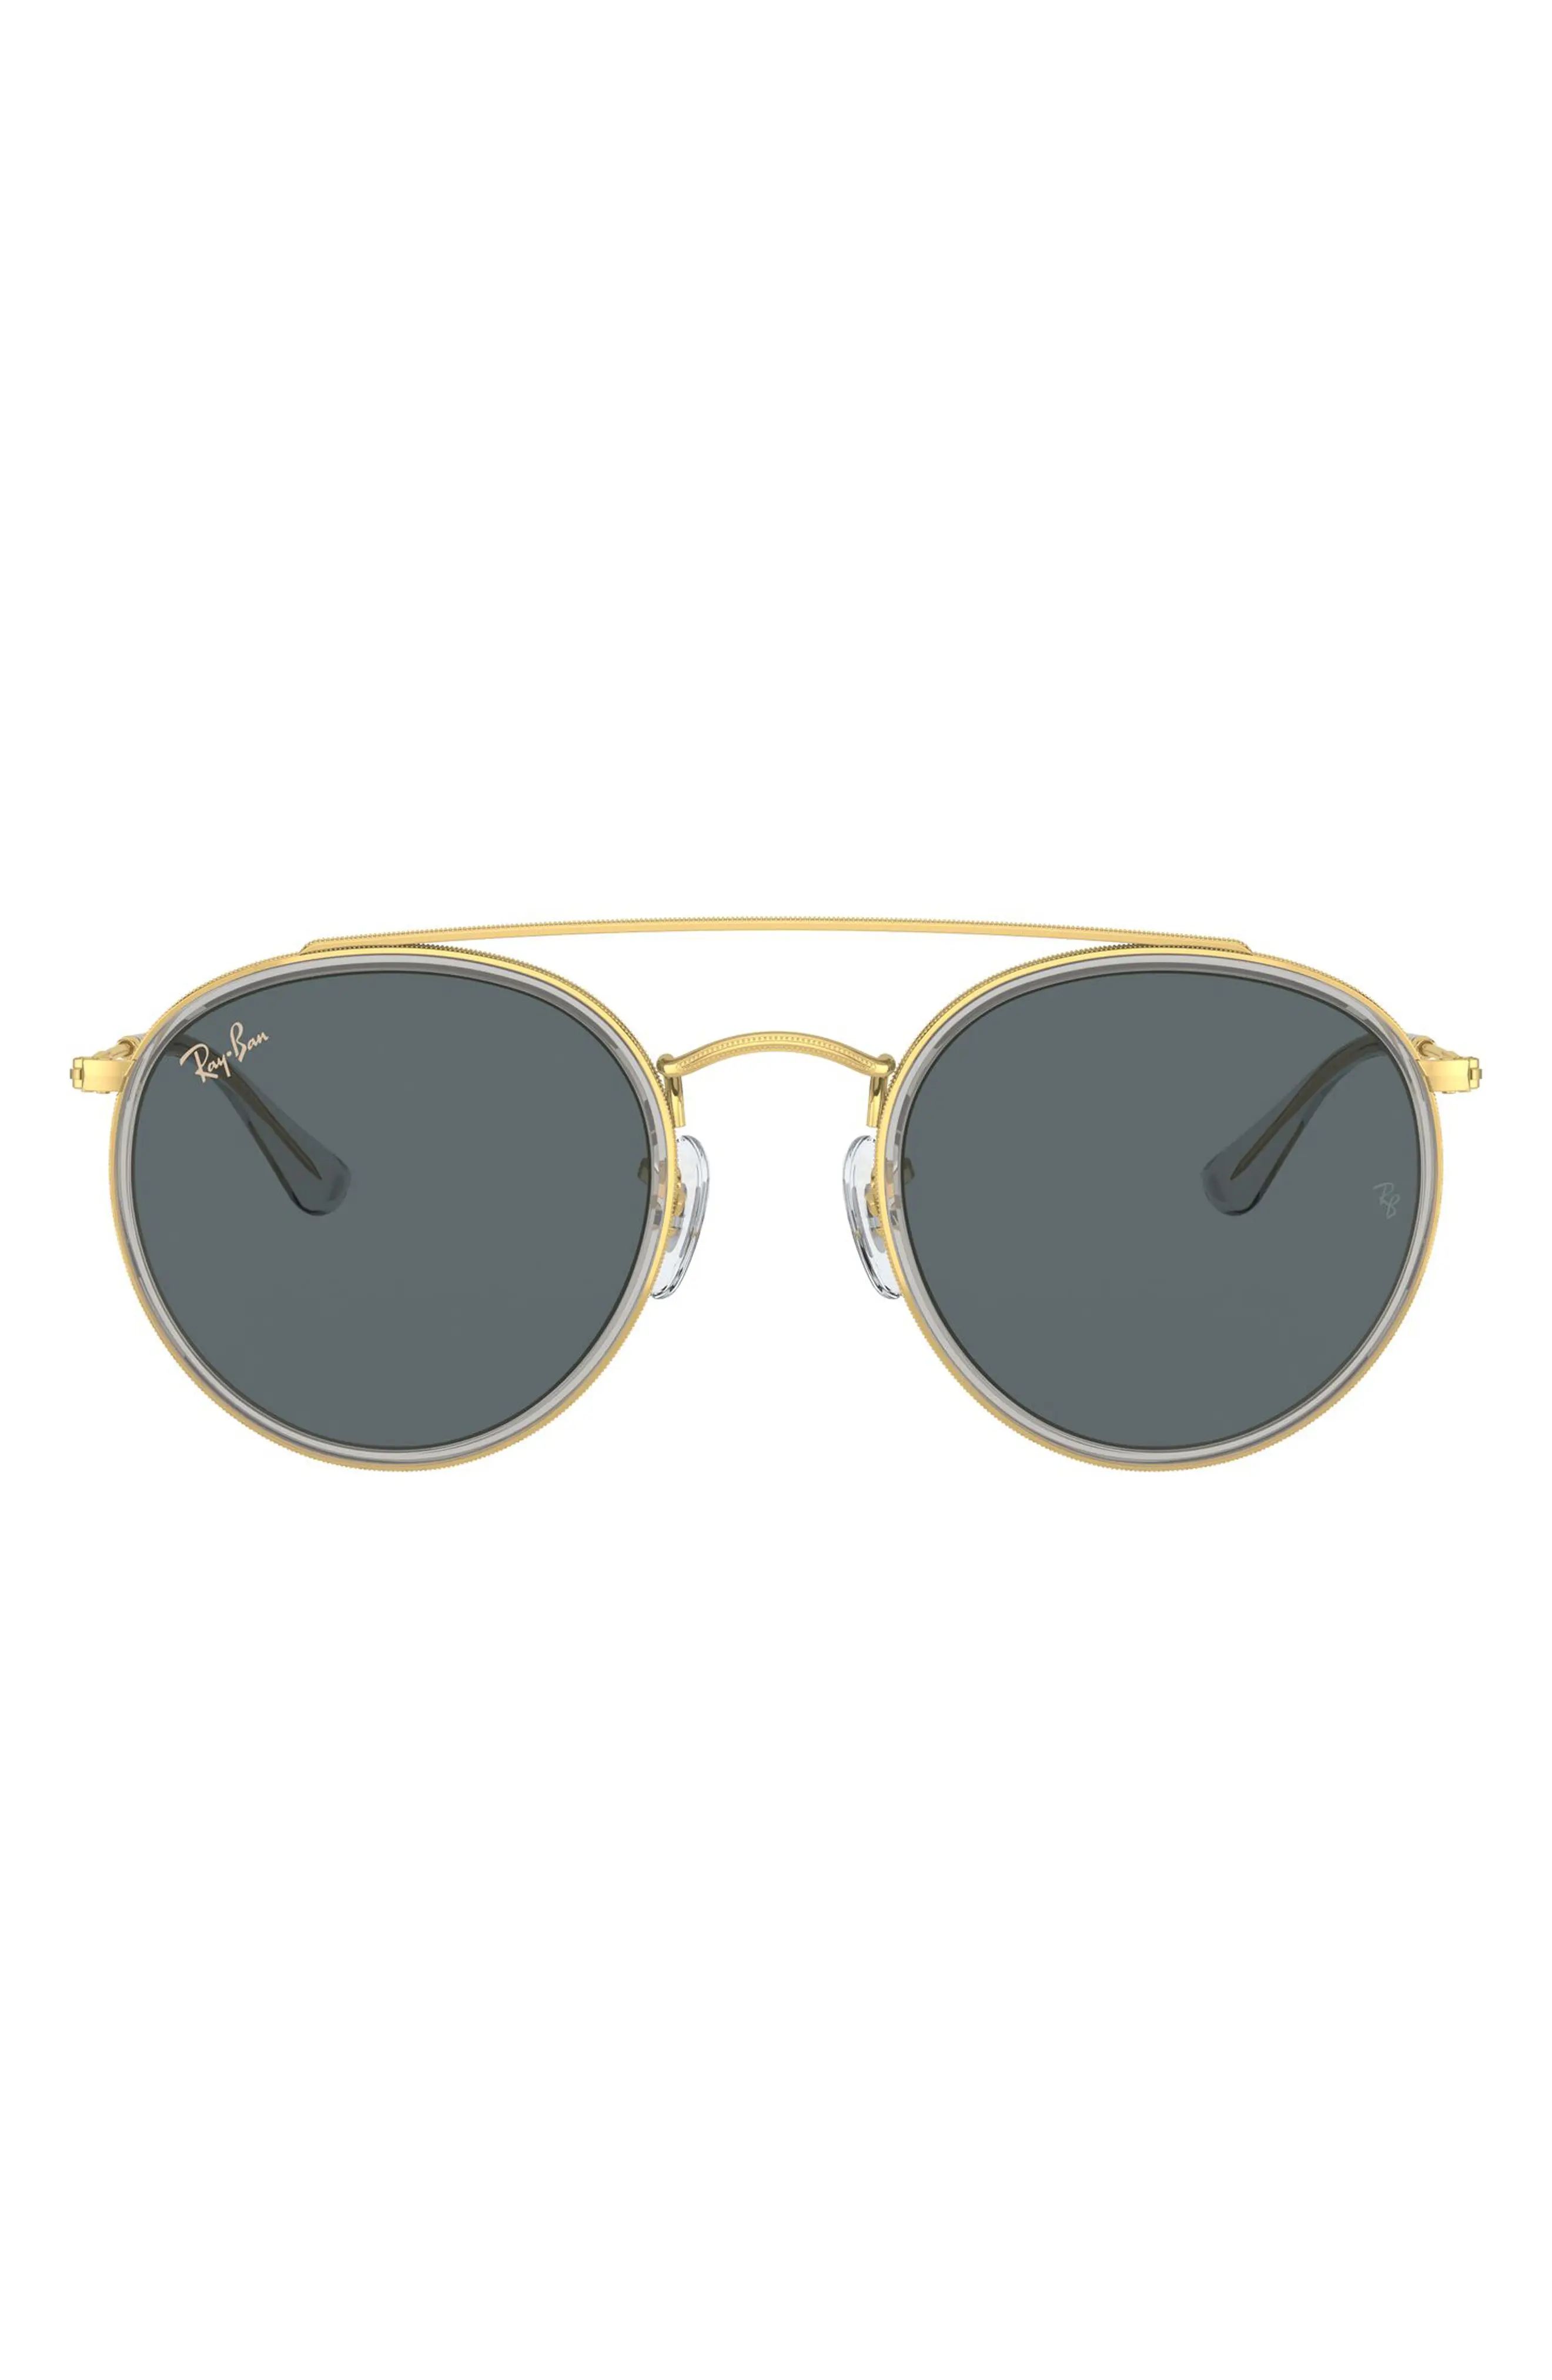 Ray-Ban 51mm Aviator Sunglasses in Gold/Blue at Nordstrom | Nordstrom